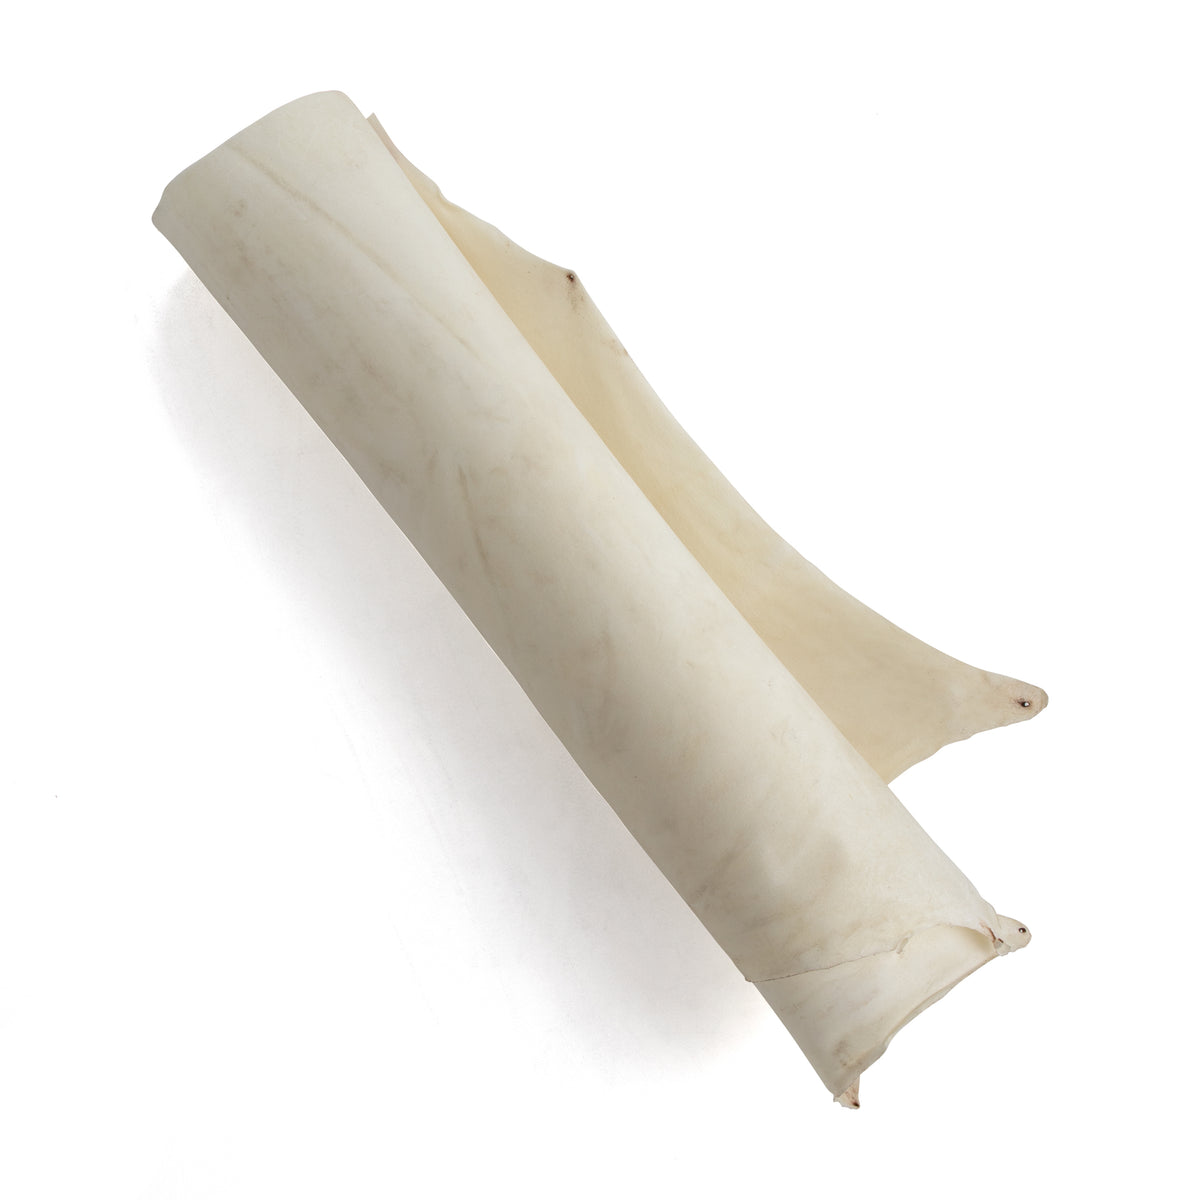 Tandy Leather Natural Cowhide Strip 72 L x 1-1/2 W 4533-00